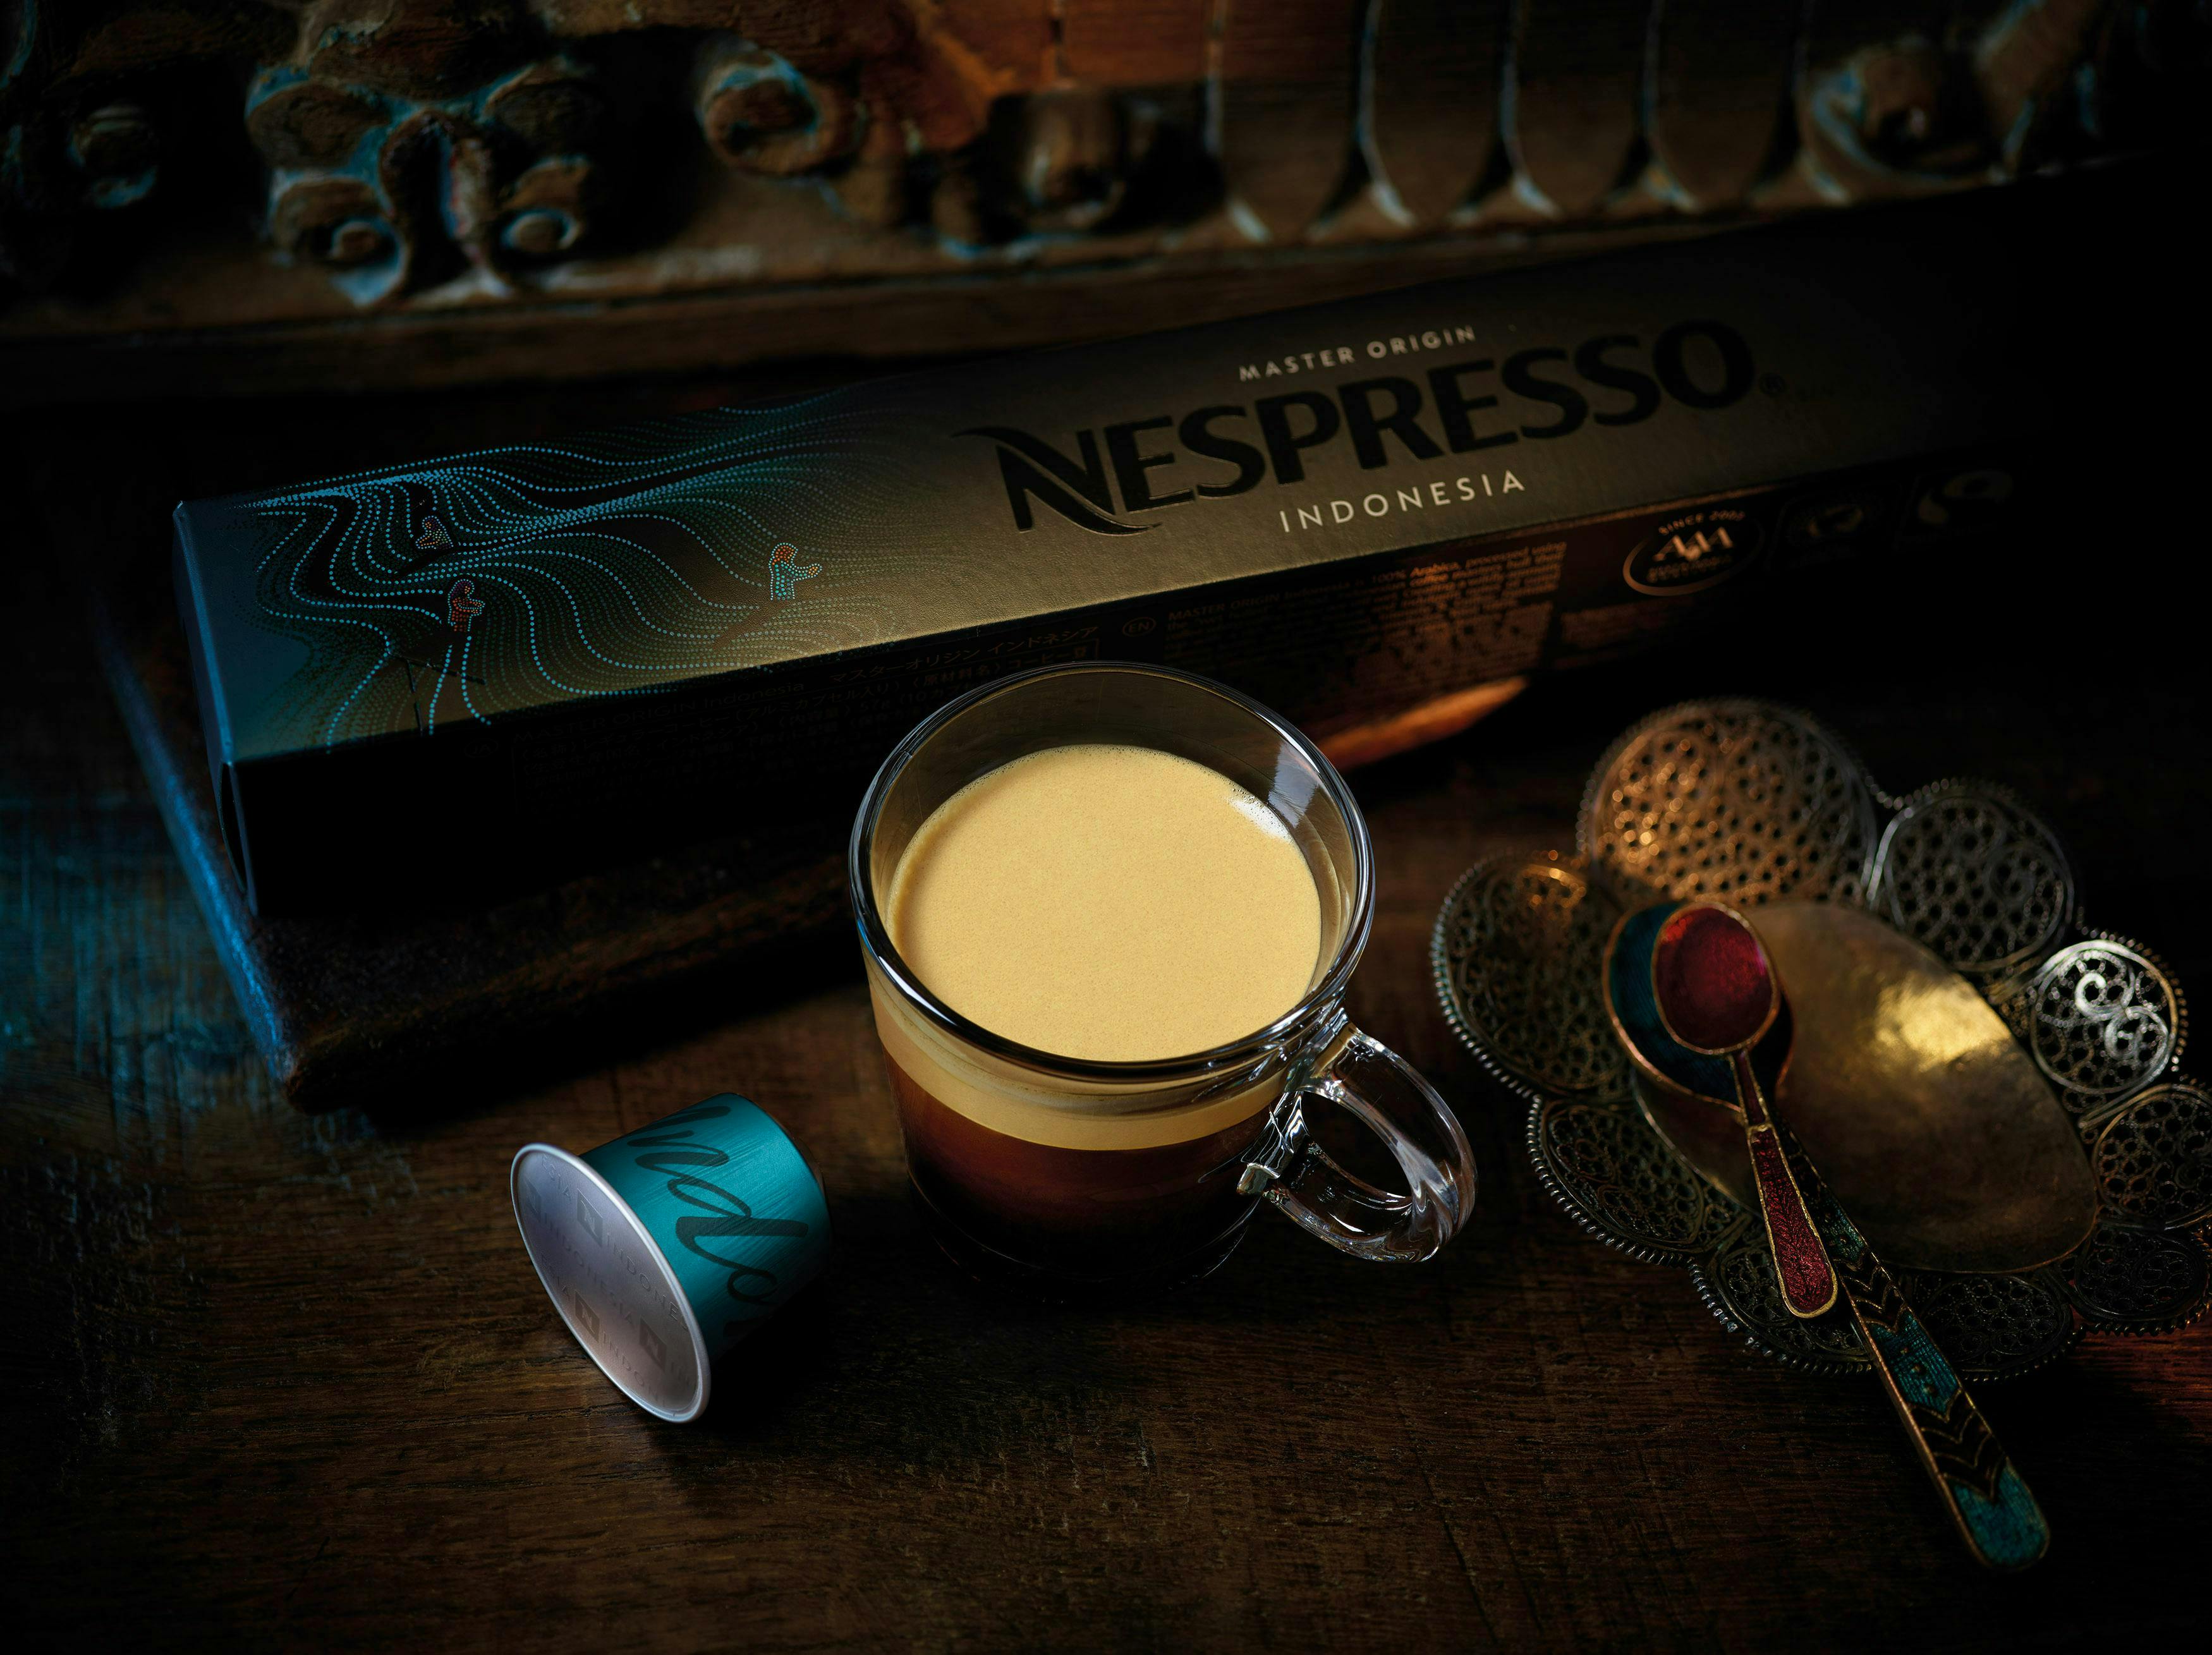 nespresso coffee indonesia coffee cup cup wristwatch pottery saucer